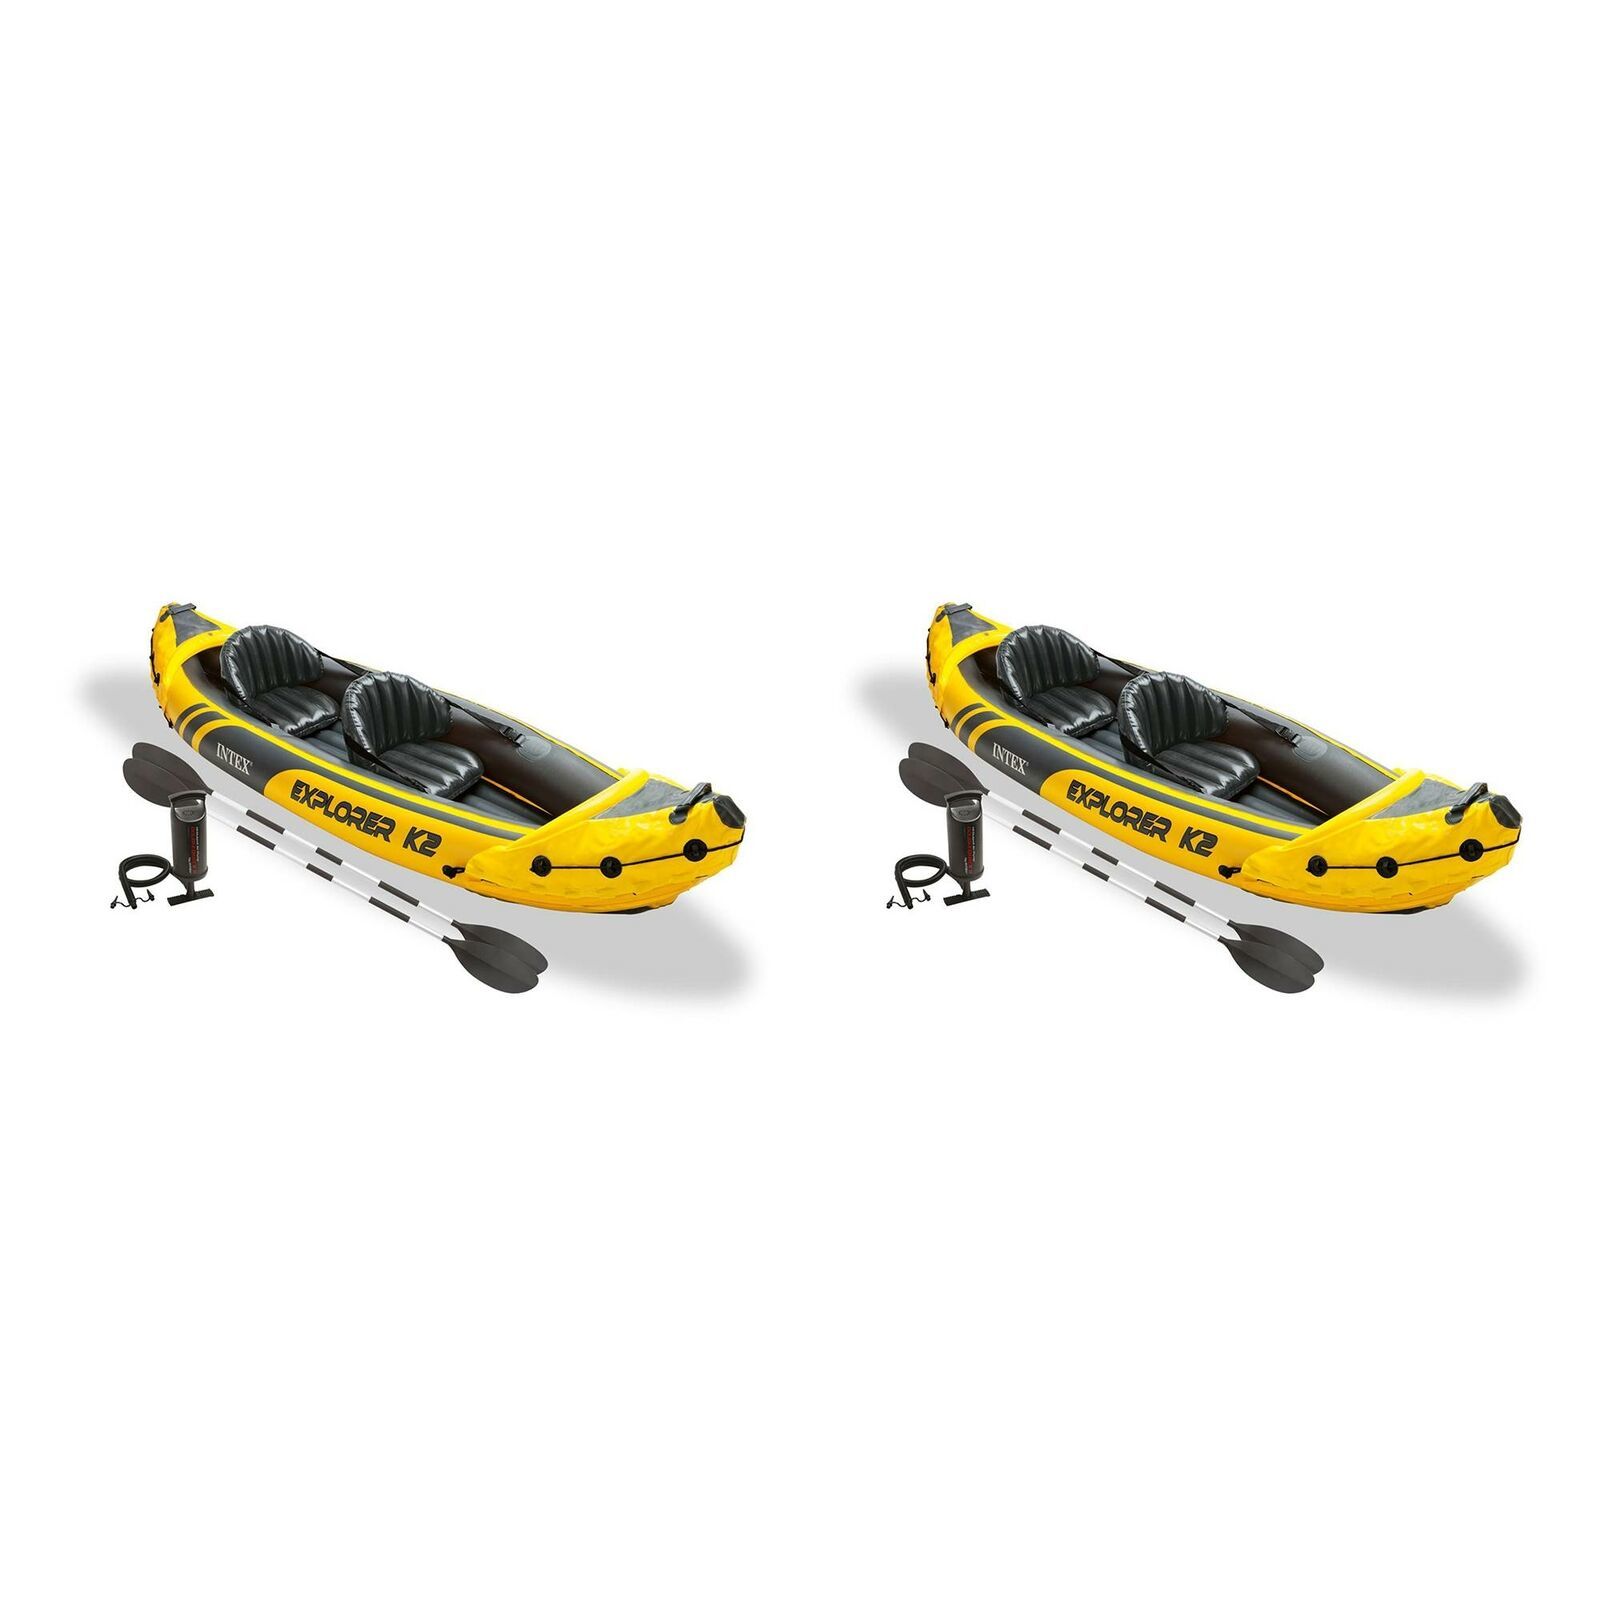 Intex Explorer K2 Yellow 2 Person Inflatable Kayak with Oars & Air Pump (2 Pack) - $471.99